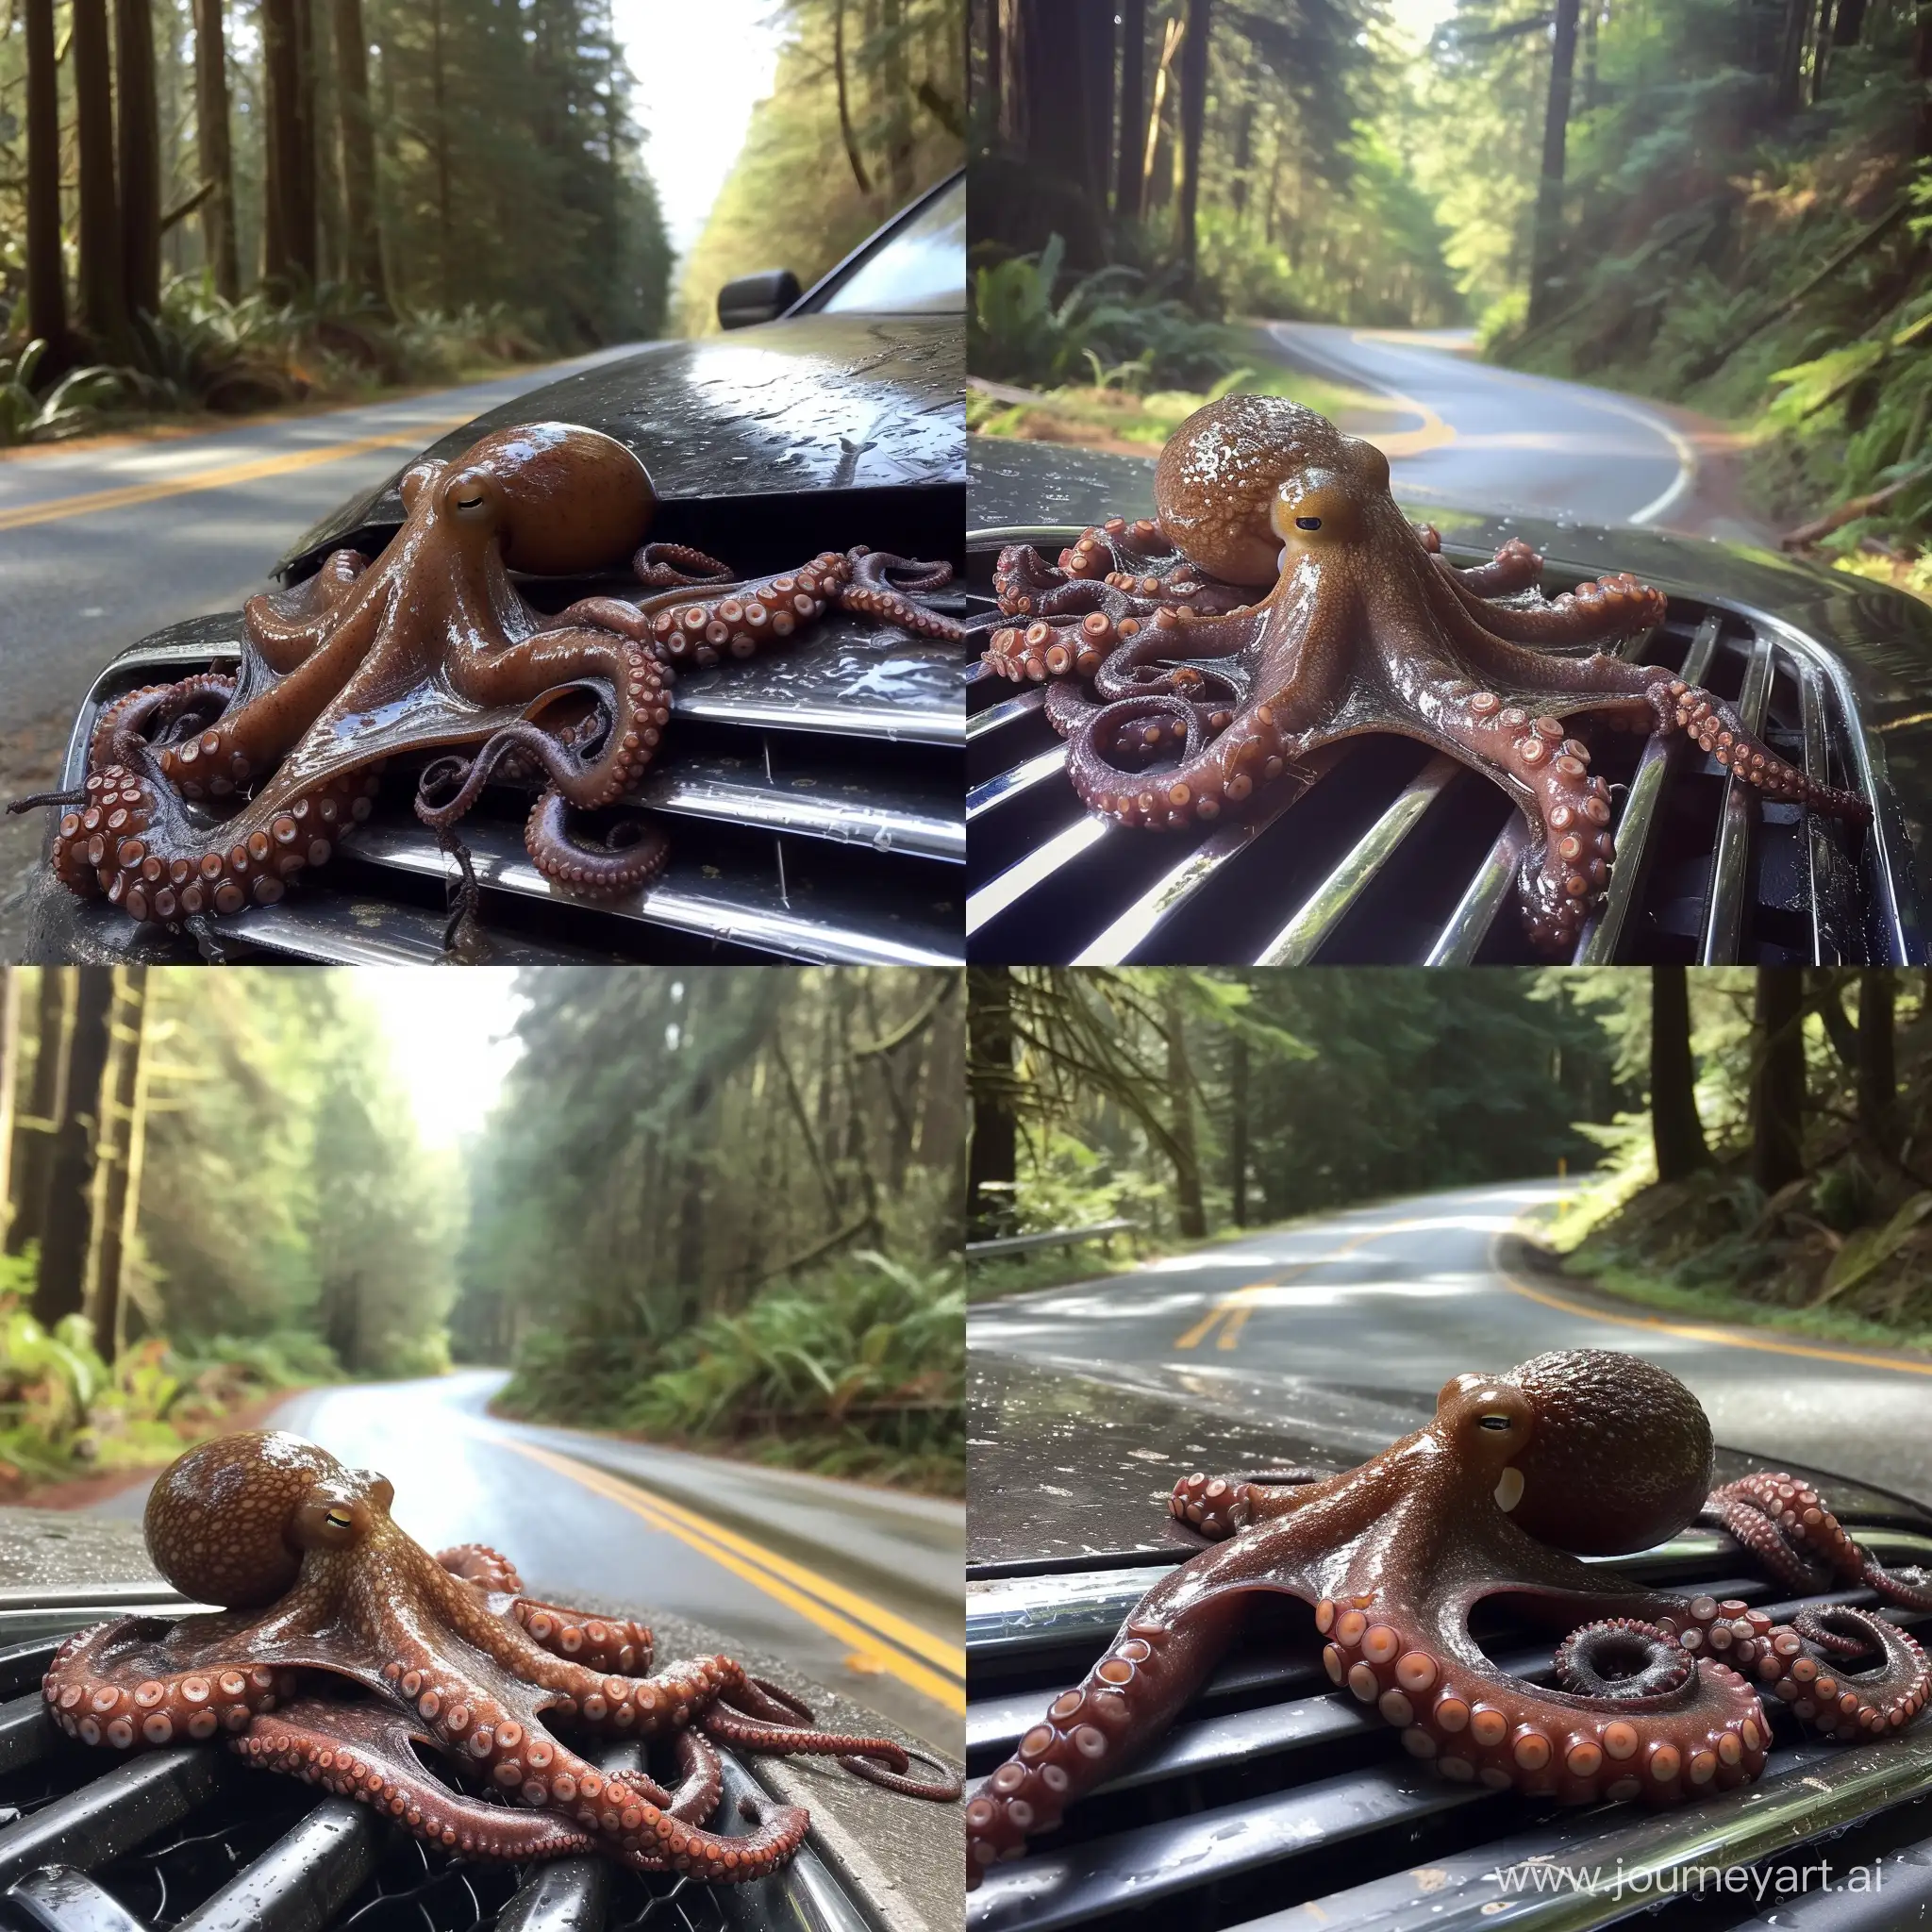 Octopus-Collision-Wet-Creature-on-Sedan-Grill-Route-101-State-Park